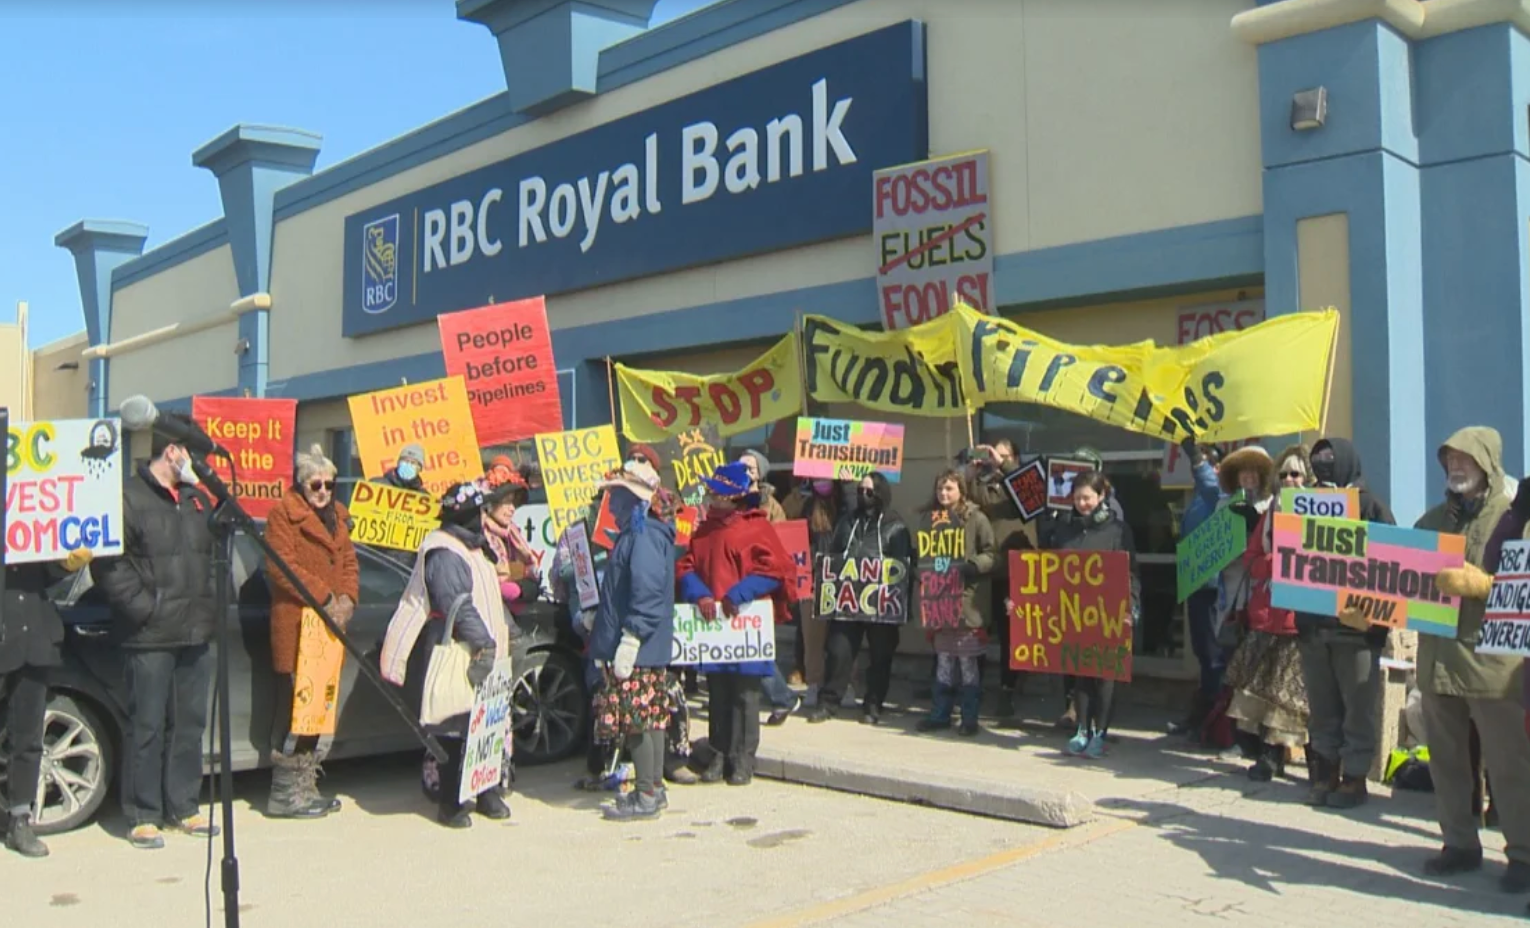 Over 40 cities rise up against RBC across Canada